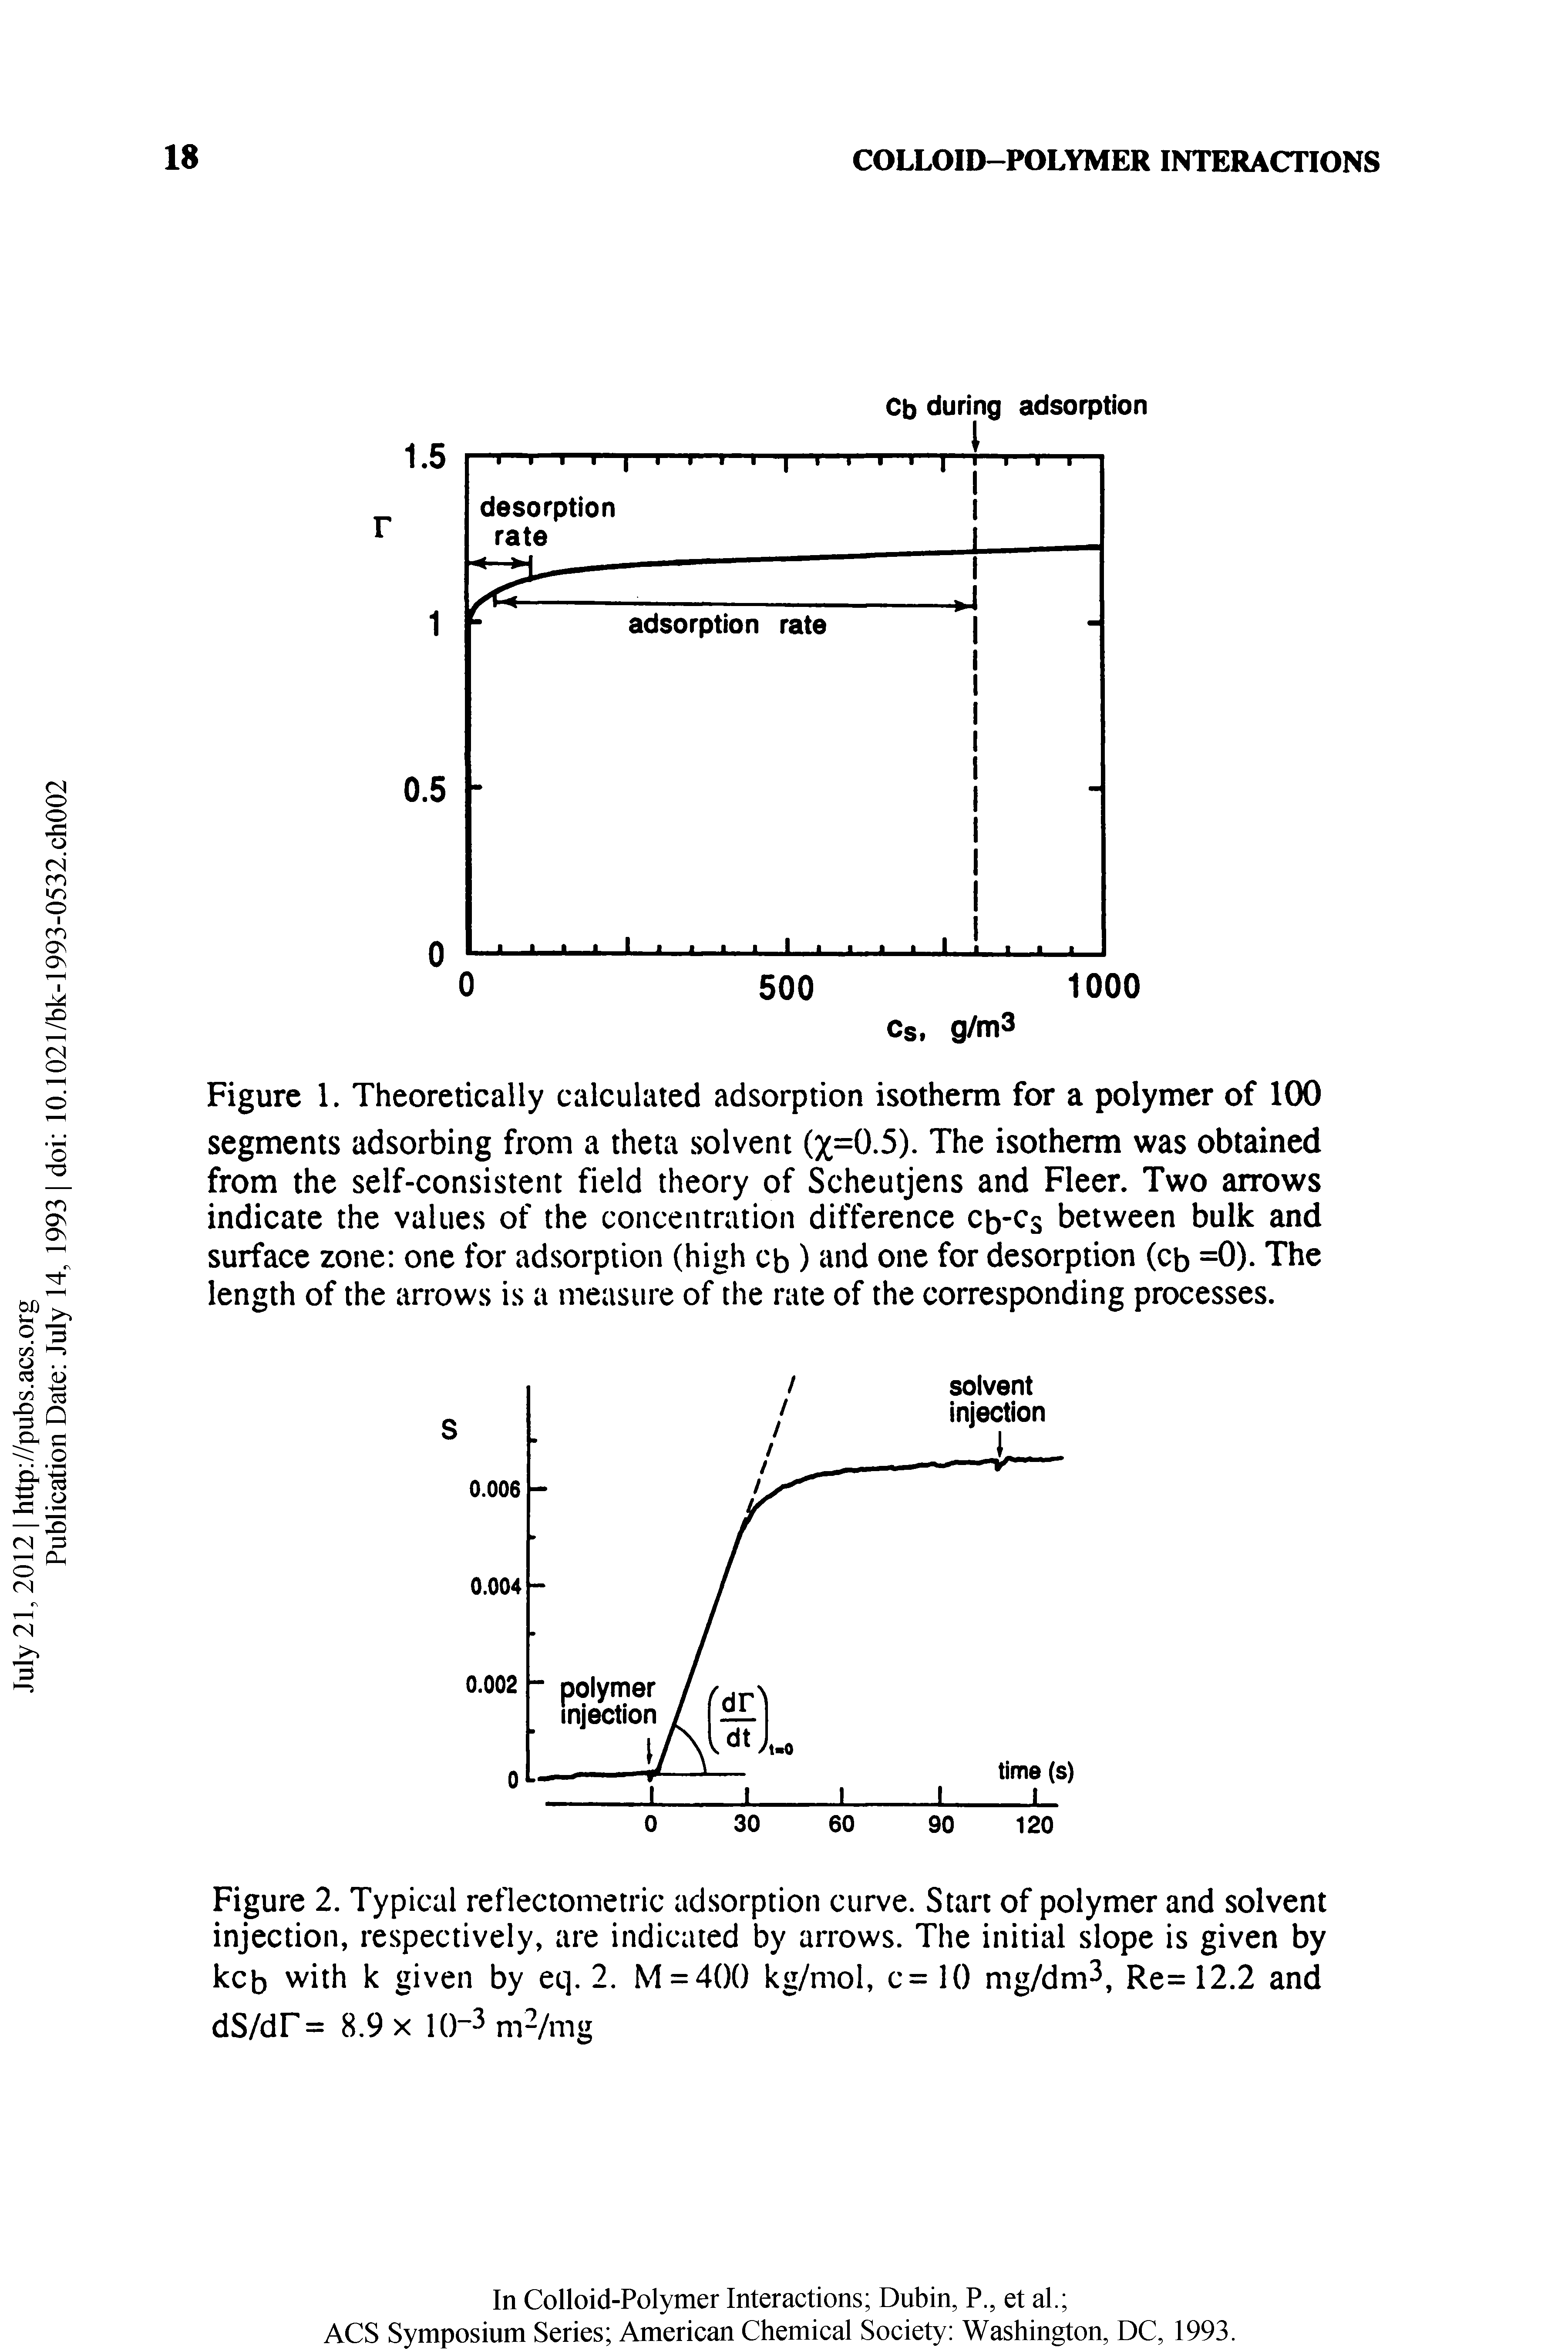 Figure 1. Theoretically calculated adsorption isotherm for a polymer of 100 segments adsorbing from a theta solvent (x=0.5). The isotherm was obtained from the self-consistent field theory of Scheutjens and Fleer. Two arrows indicate the values of the concentration difference Cb-Cs between bulk and surface zone one for adsorption (high cb ) and one for desorption (cb =0). The length of the arrows is a measure of the rate of the corresponding processes.